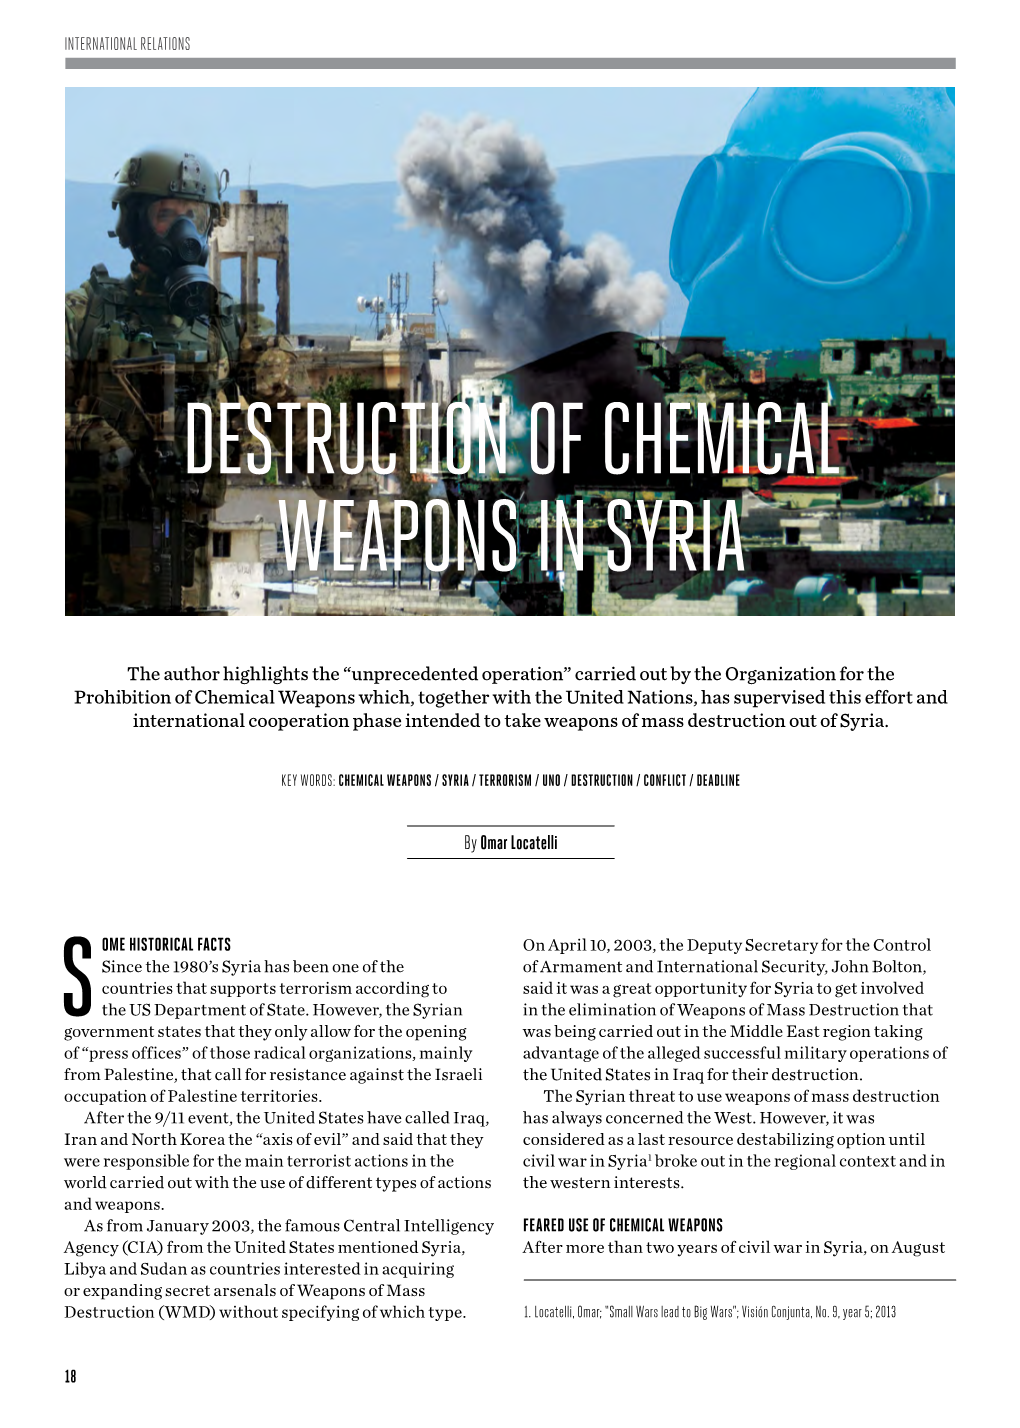 Destruction of Chemical Weapons in Syria